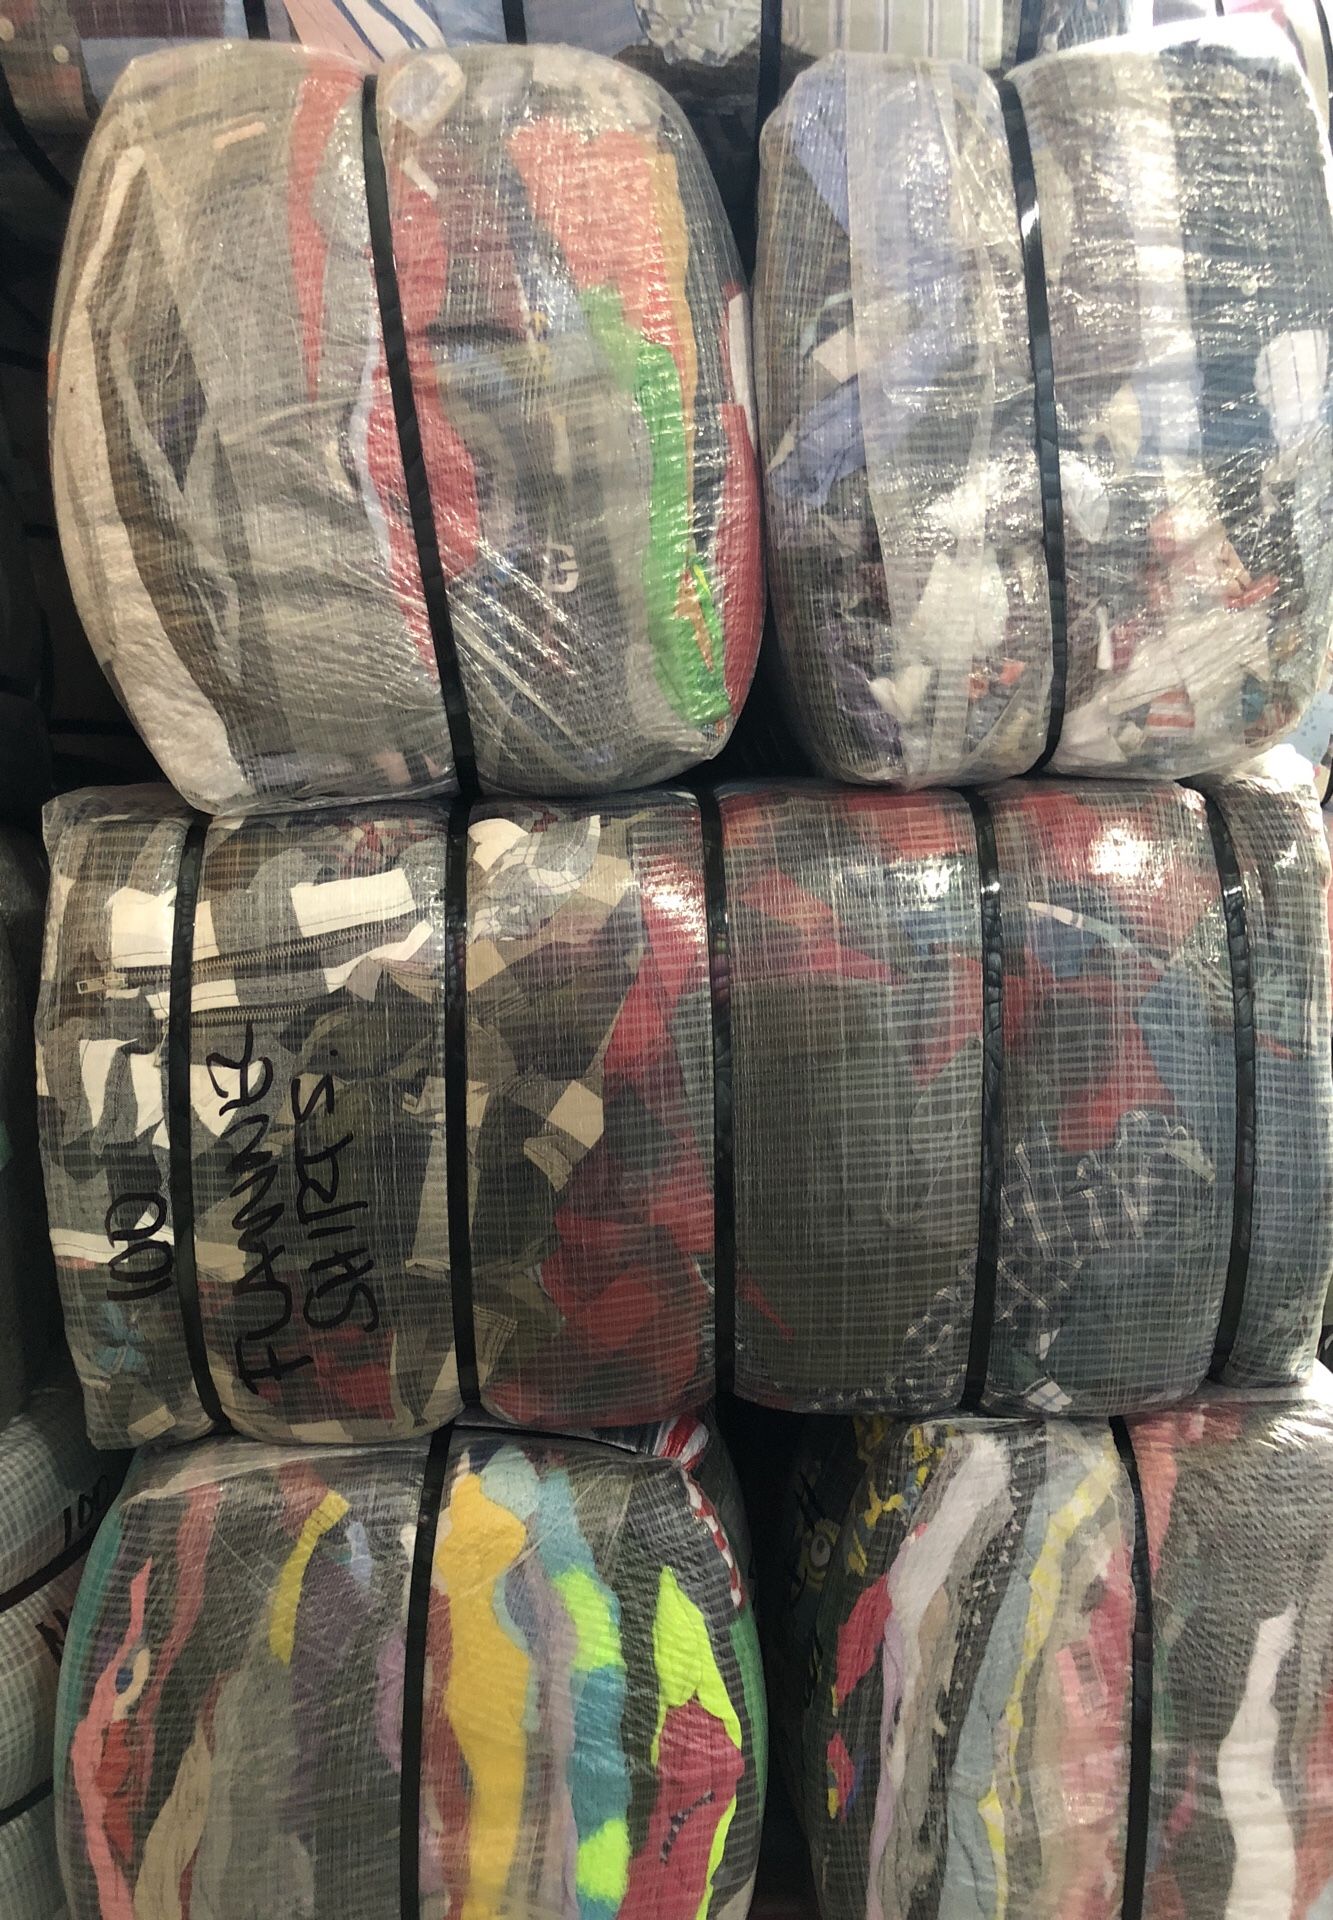 100 lb bale of used flannel shirts